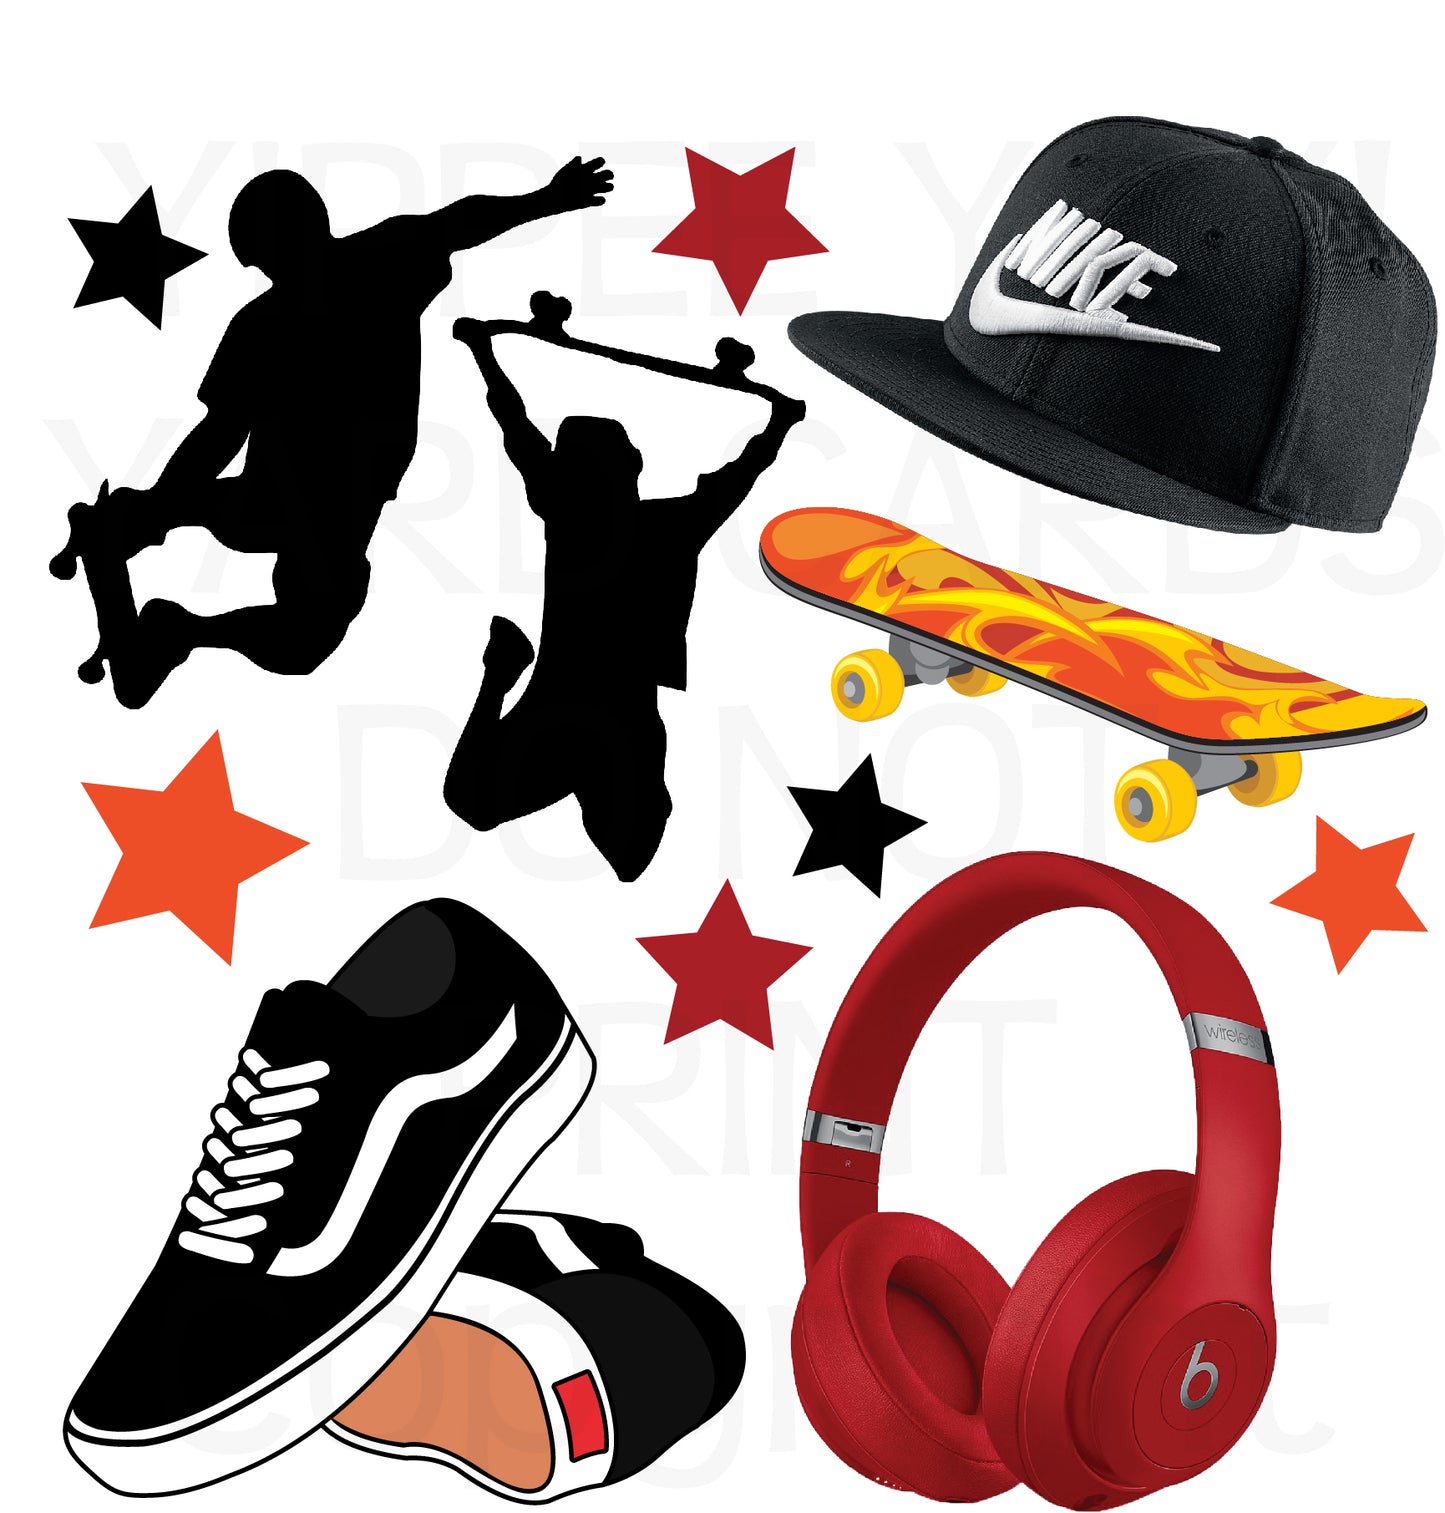 Skater Half Sheet Misc. (Must Purchase 2 Half sheets - You Can Mix & Match)